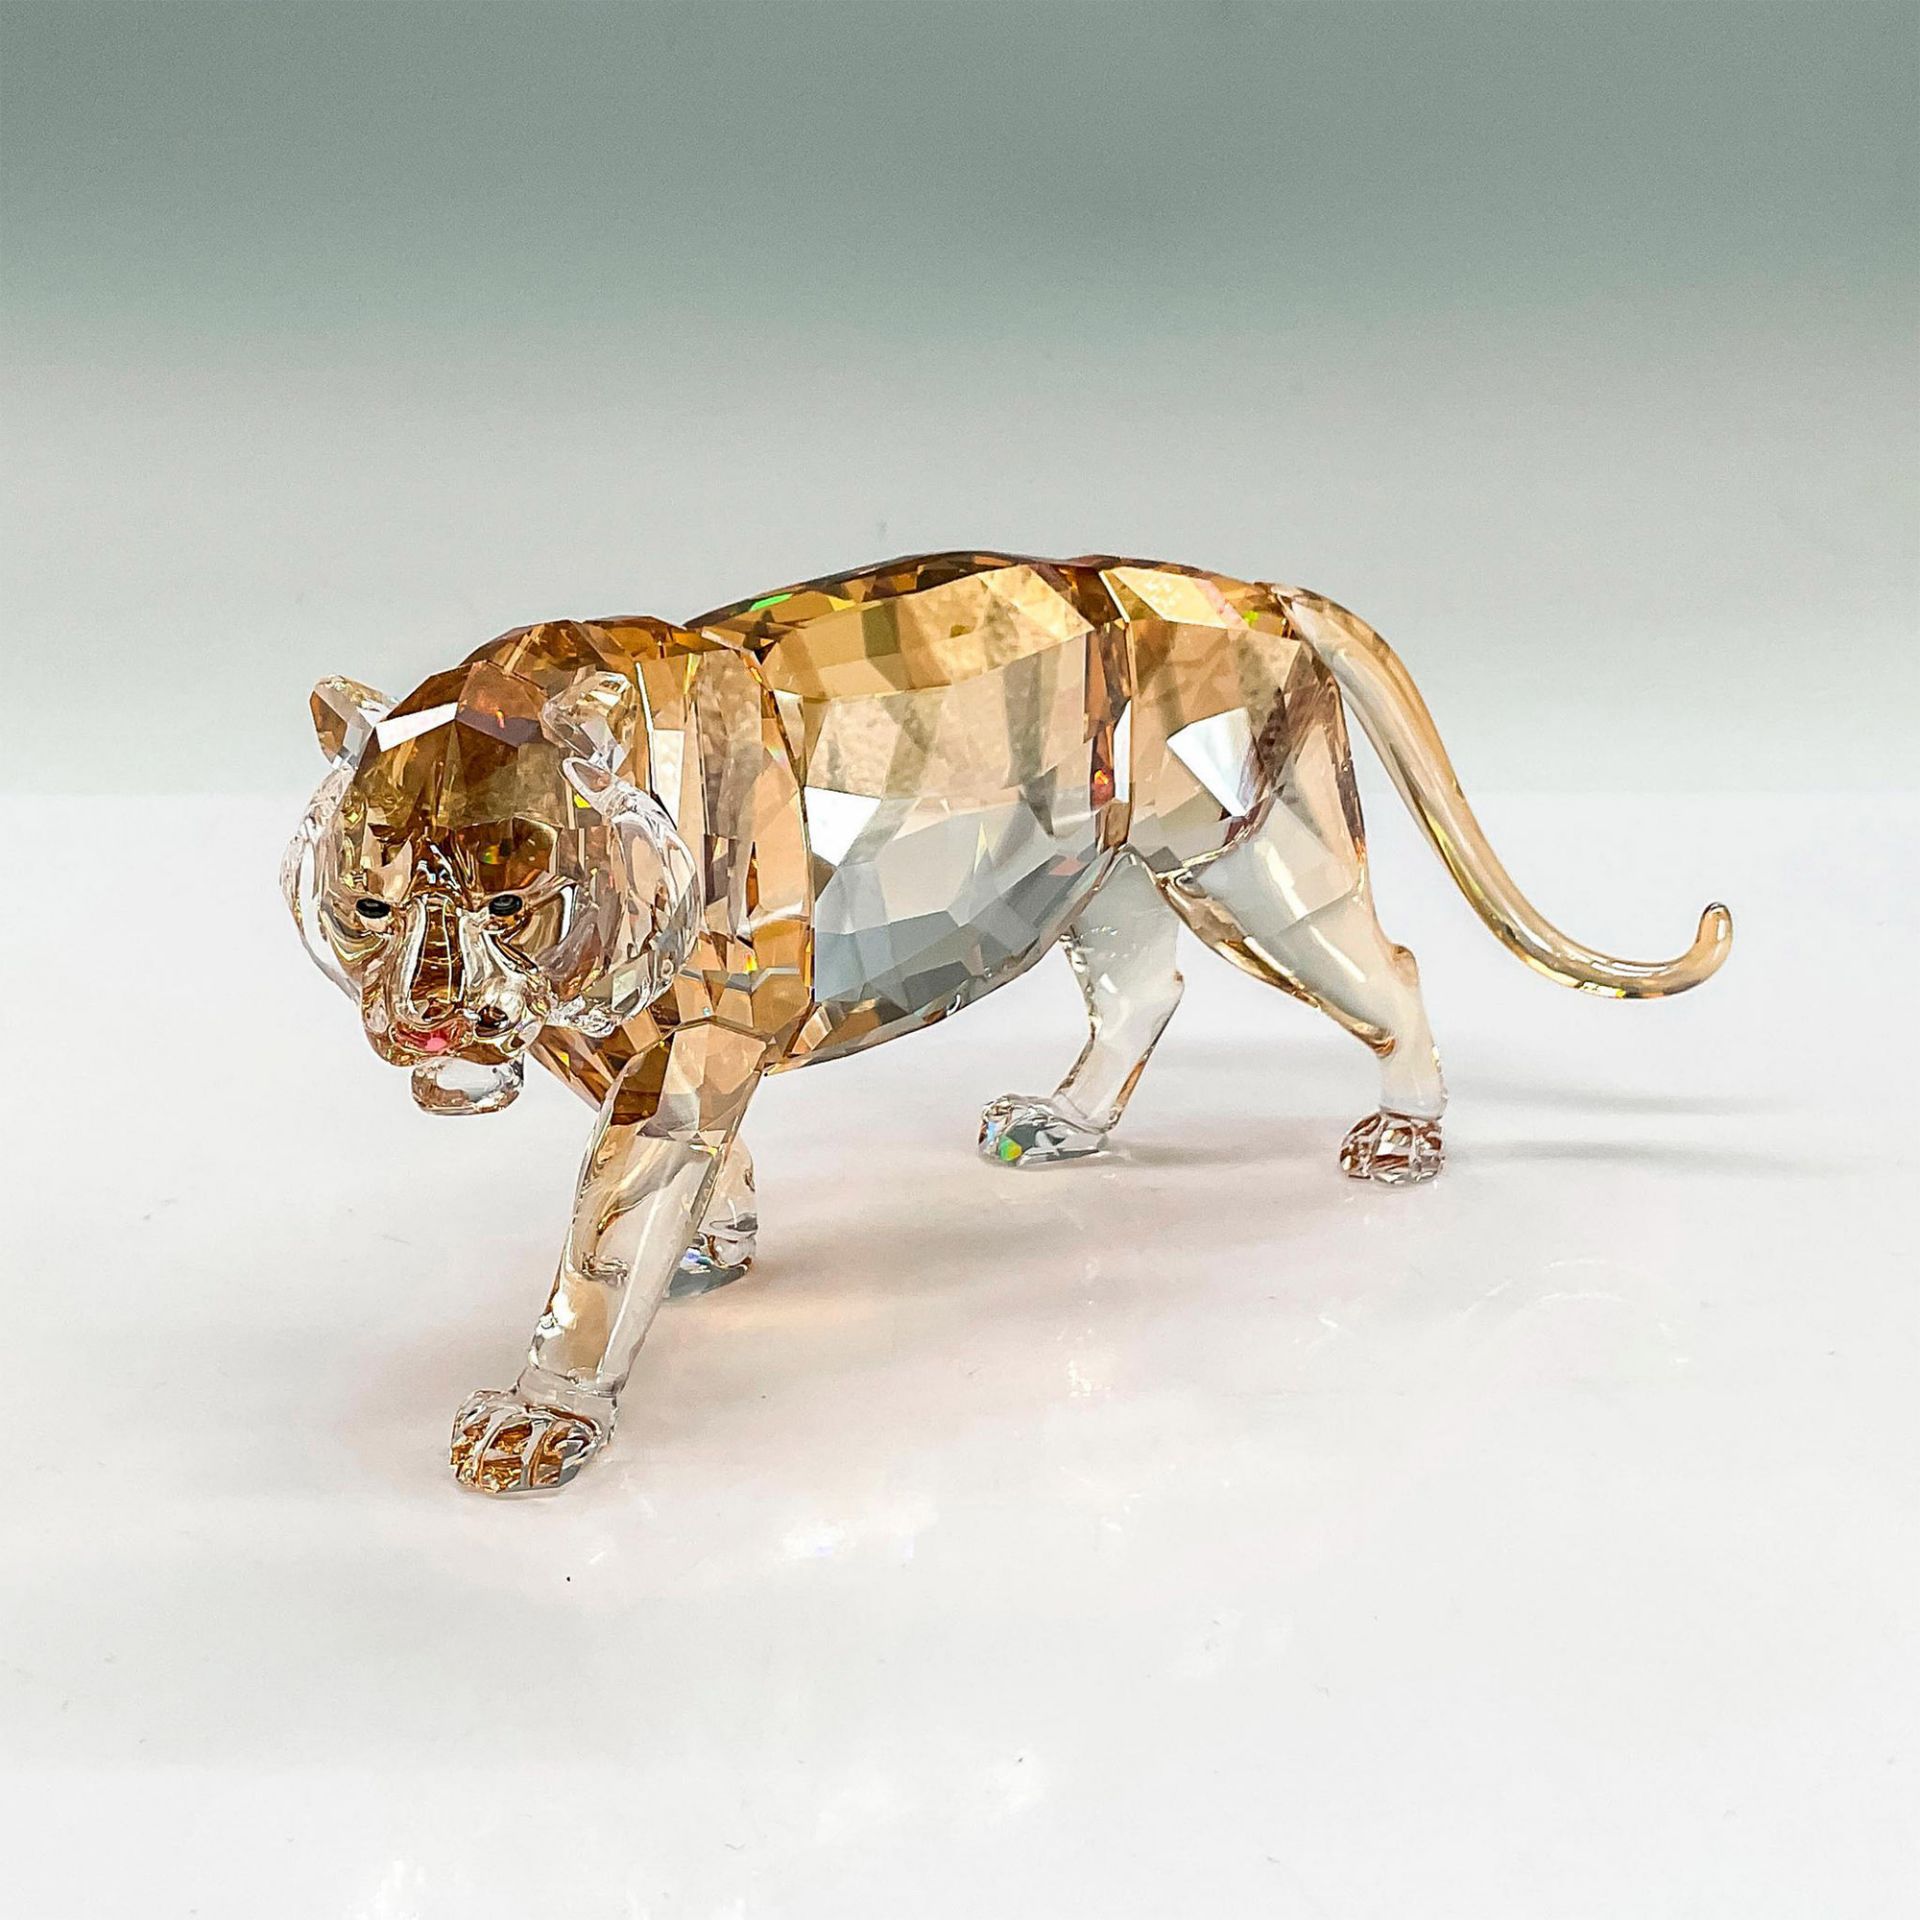 3pc Swarovski Crystal Figurines, Tiger and Cubs - Image 3 of 8